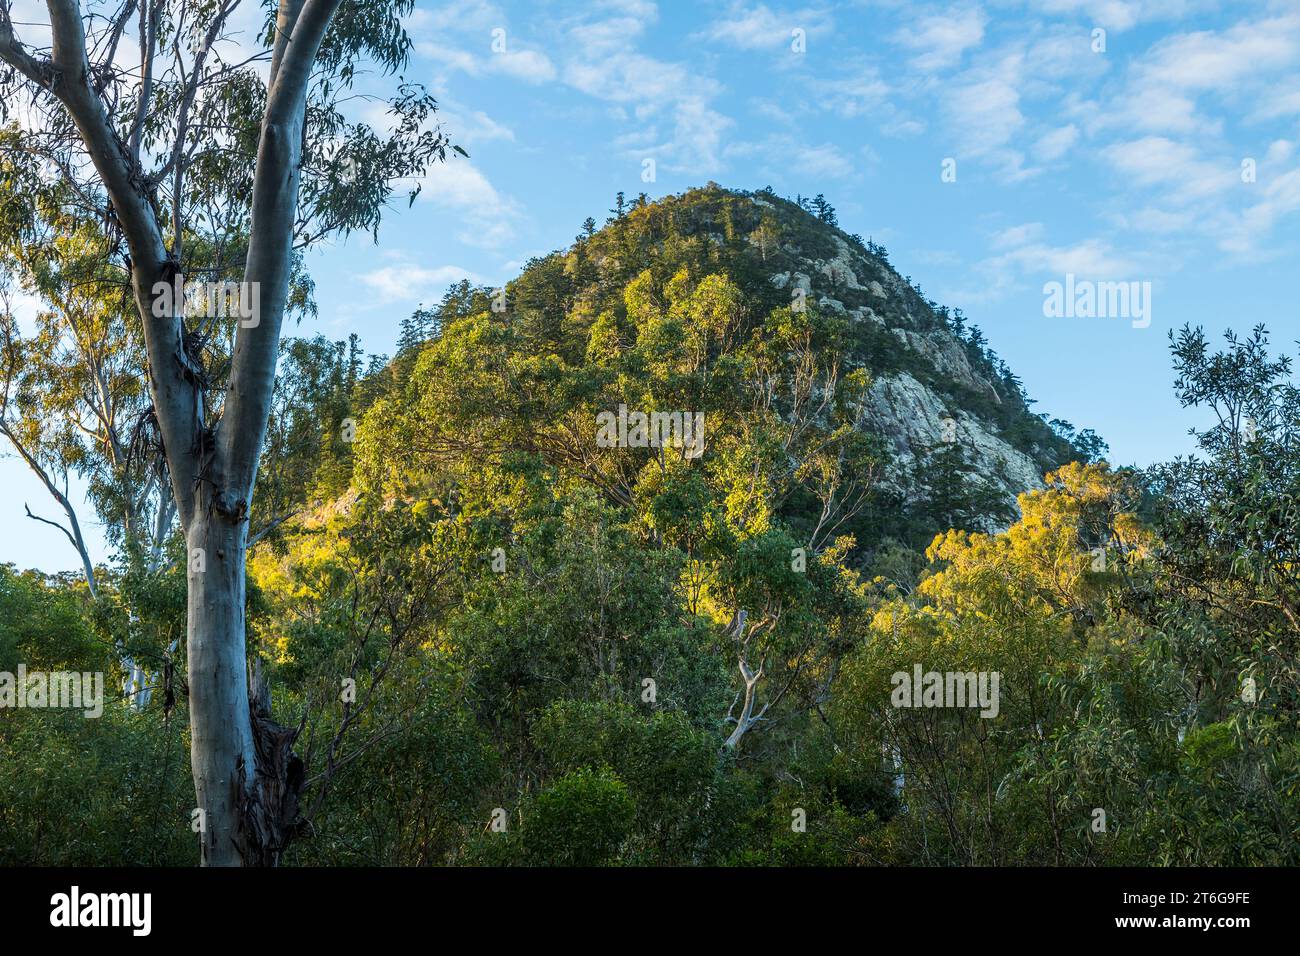 Ancient Volcano at Mount Jim Crow (Baga) National Park near Yeppoon, Queensland - A Geological Marvel in Australia's Scenic Landscape. Stock Photo